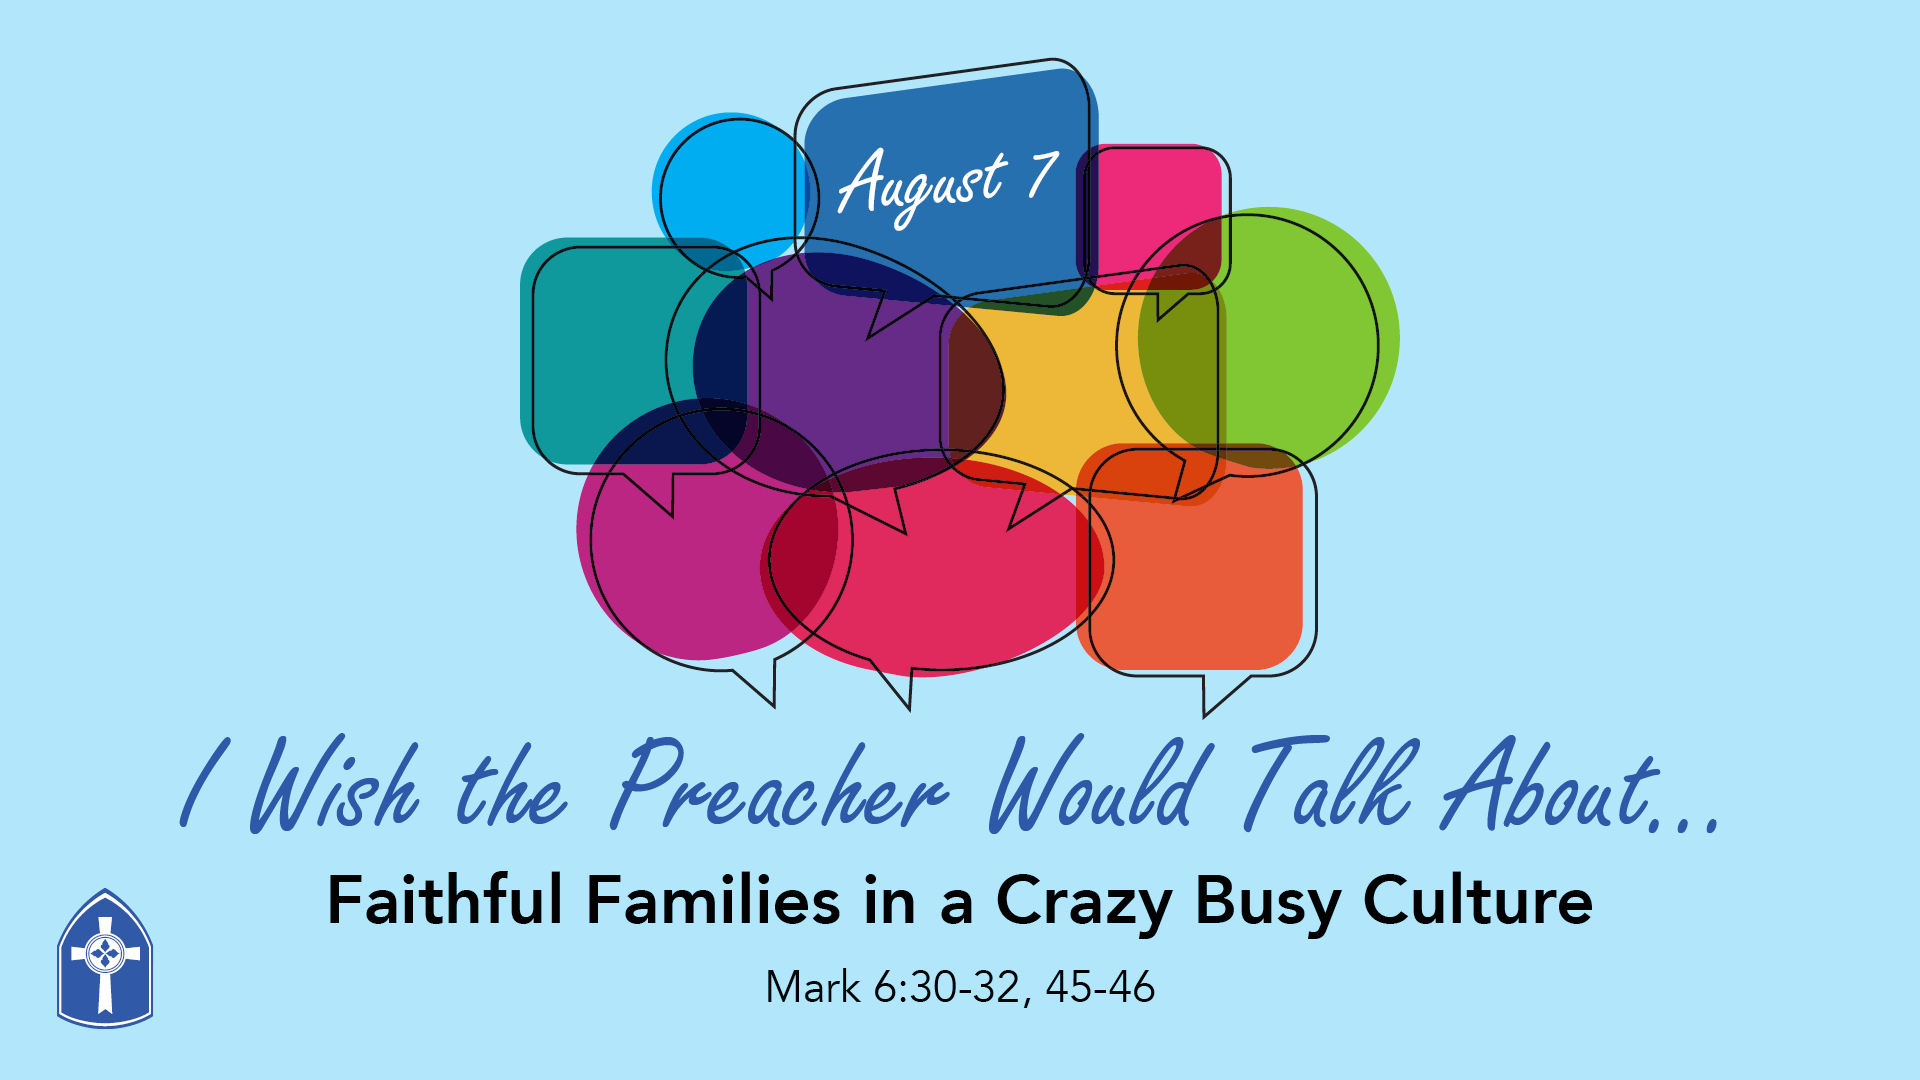 Faithful Families in a Crazy Busy Culture